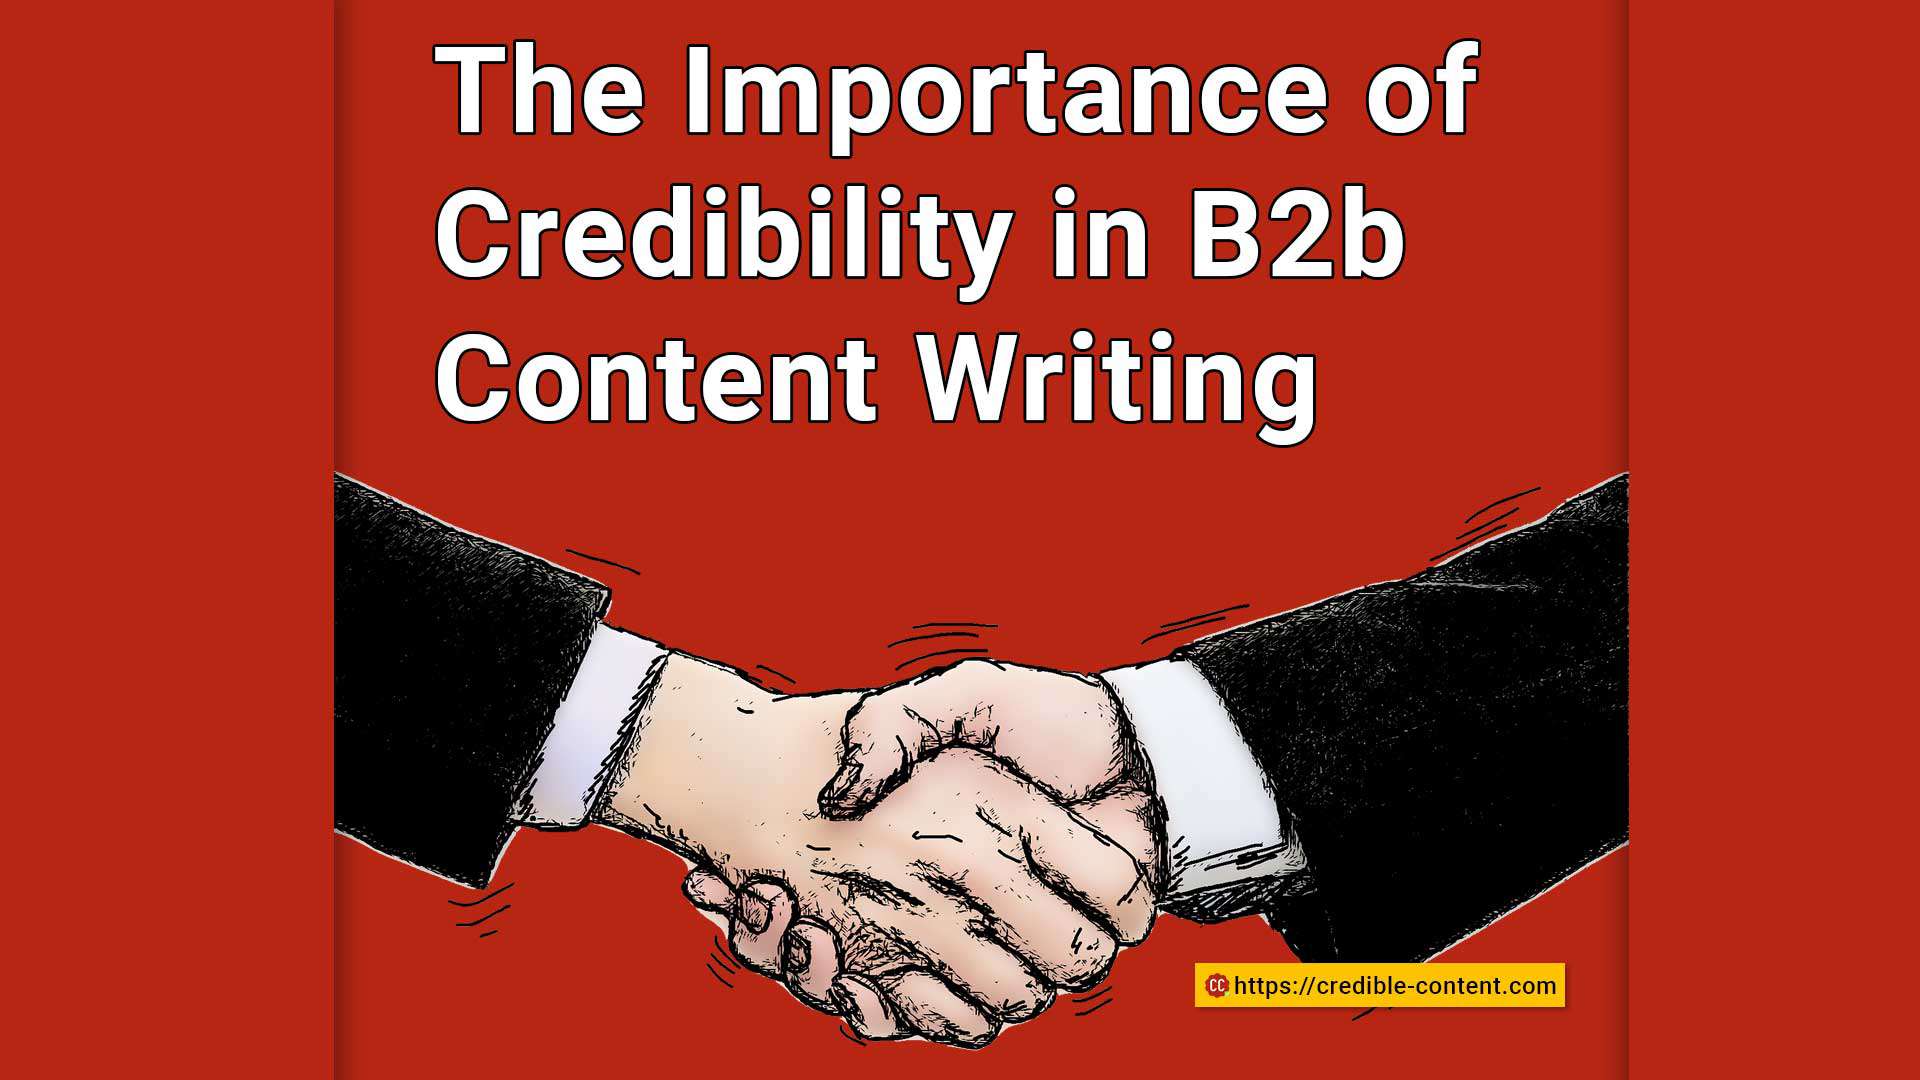 The importance of credibility in B2B content writing